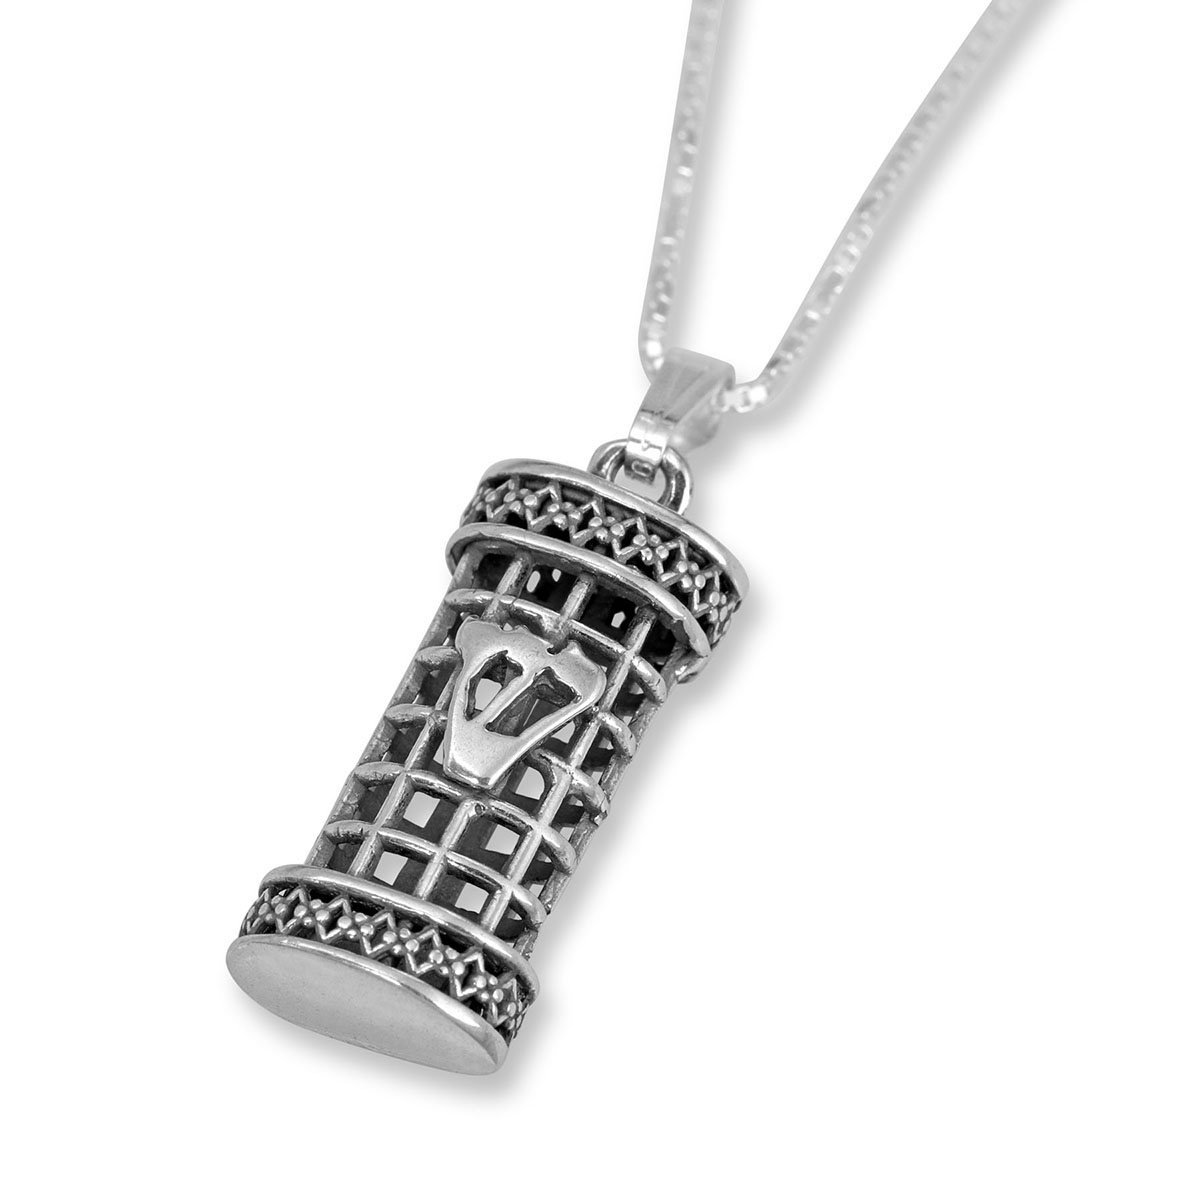 Ornate Mezuzah with Shin Sterling Silver Necklace - 1